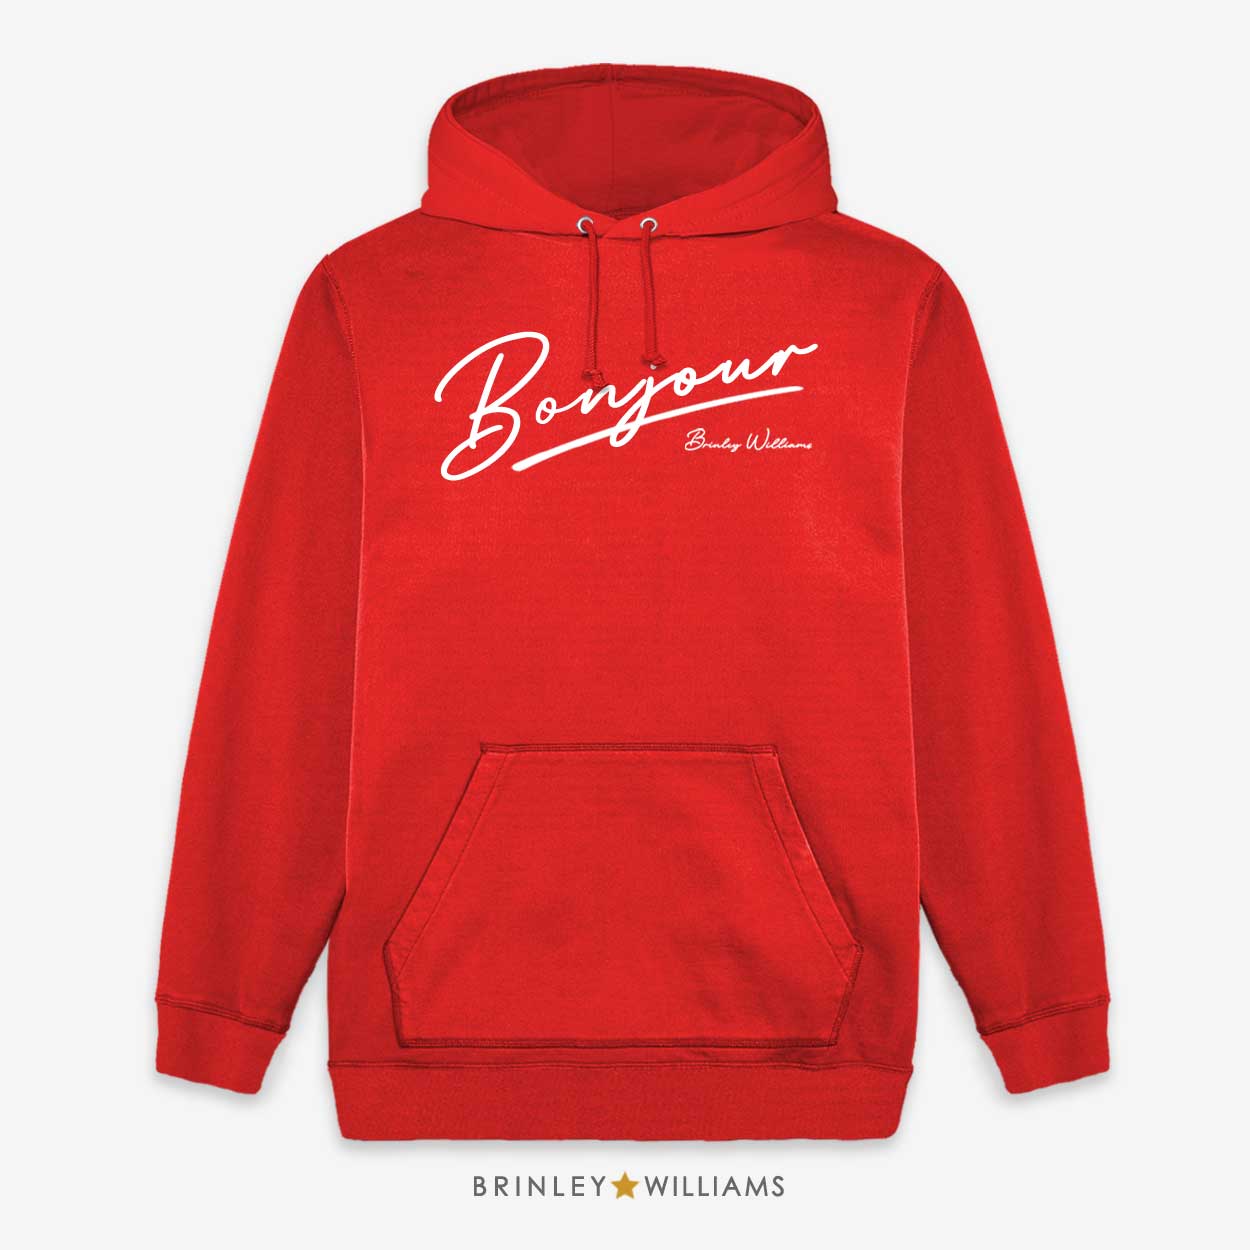 Bonjour Unisex Hoodie - Fire red